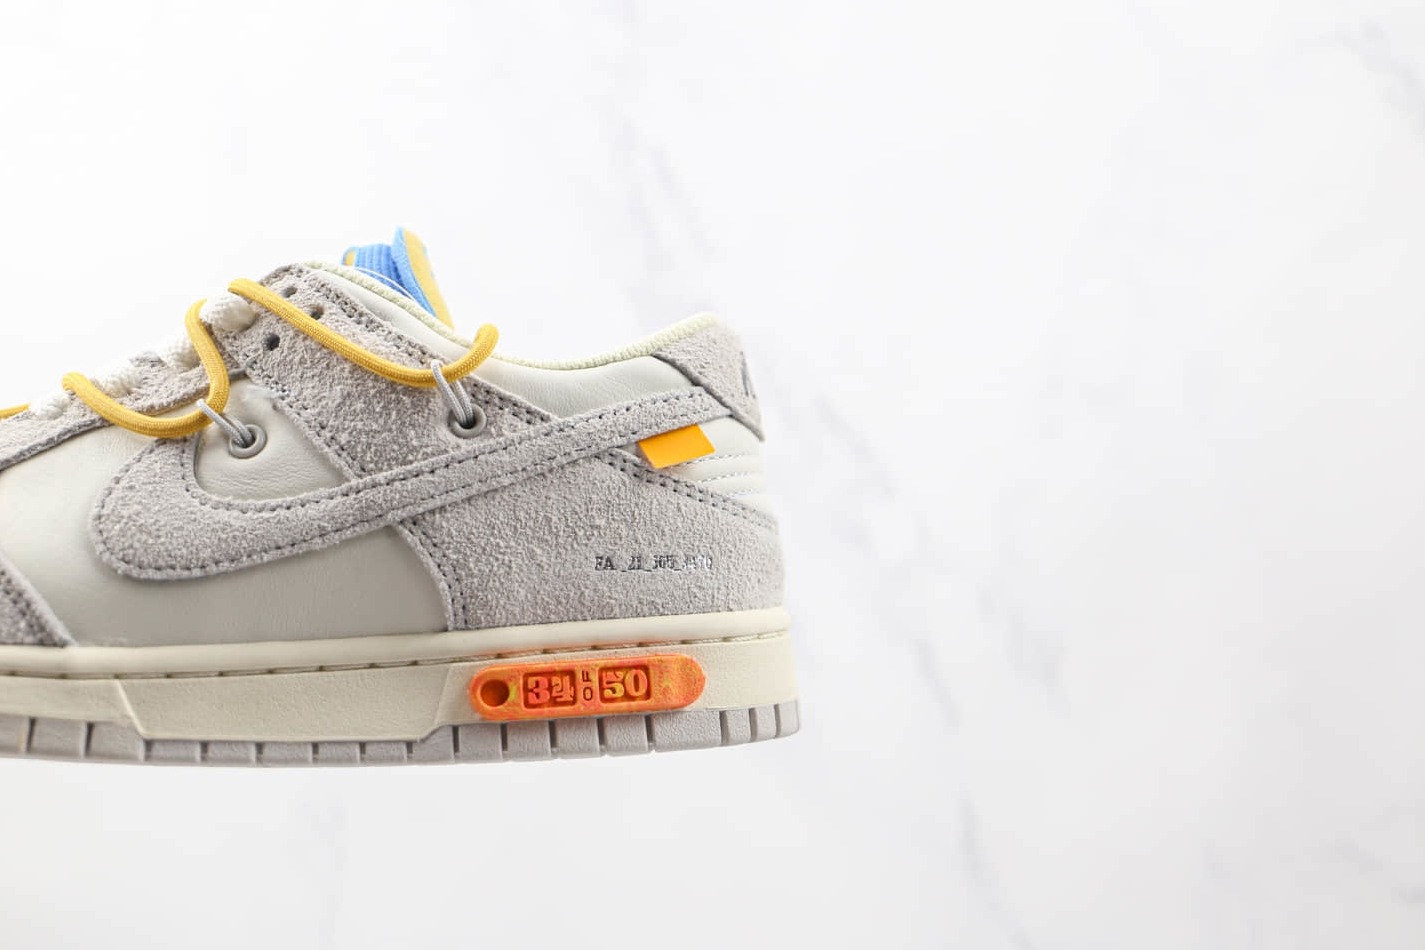 Nike Off-White x Dunk Low 'Lot 34 of 50' DJ0950-102 – Limited Edition Collaboration Sneakers